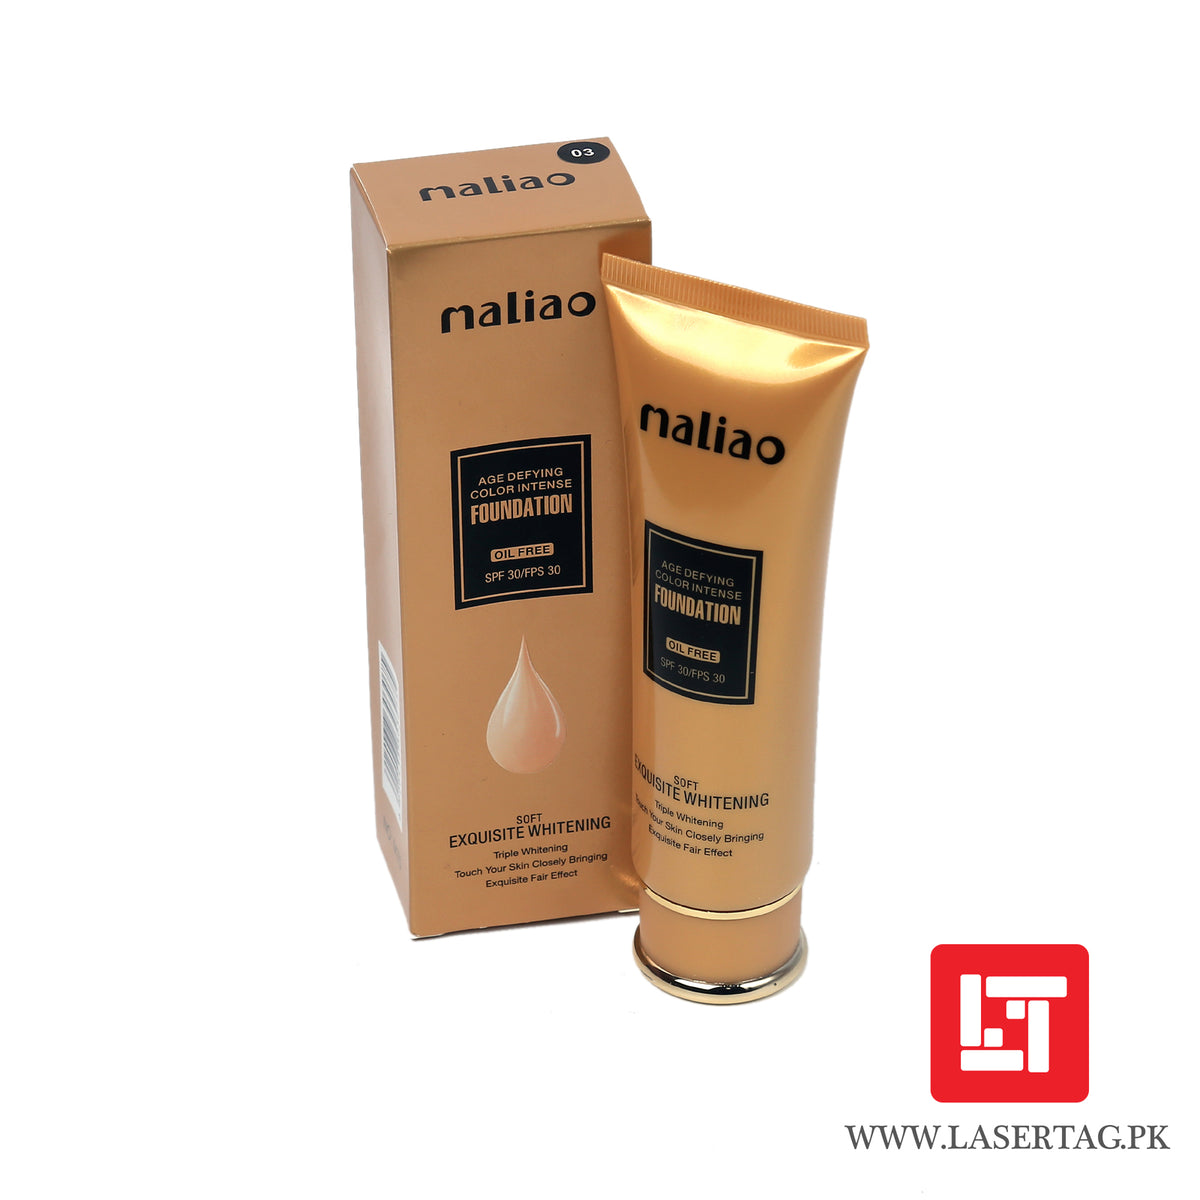 Maliao Age Defying Color Intense Foundation Oil Free Soft Exquisite Whitening M70-03 80g freeshipping - lasertag.pk